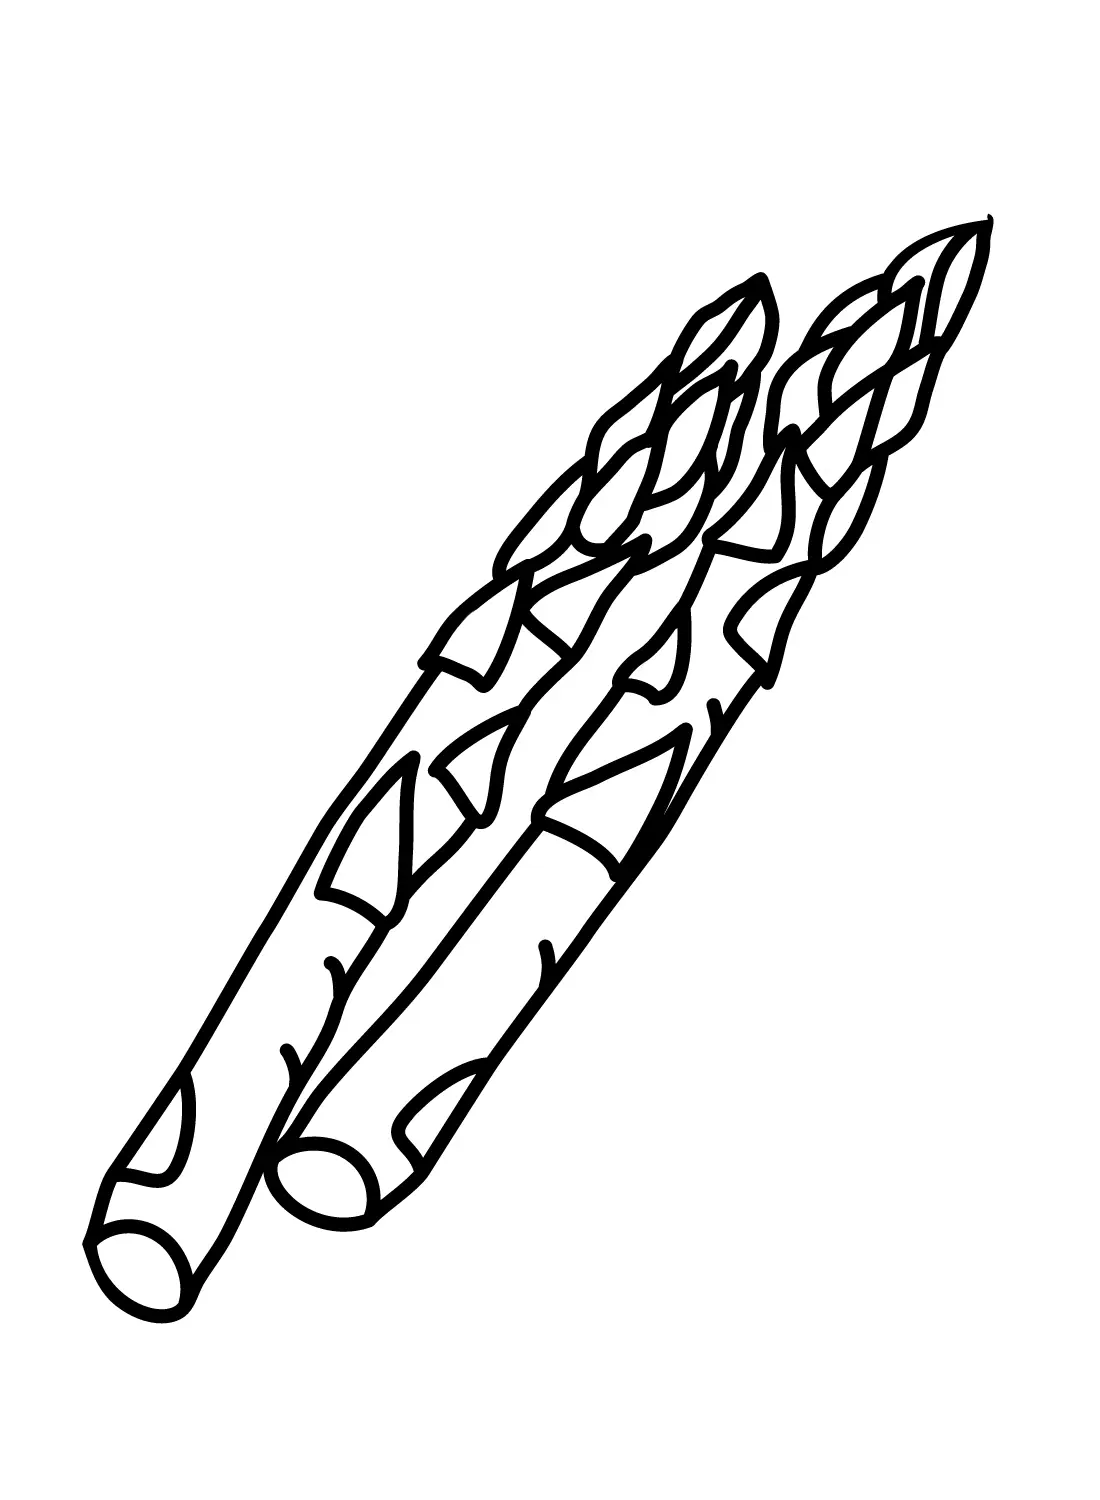 Asparagus Coloring Pages